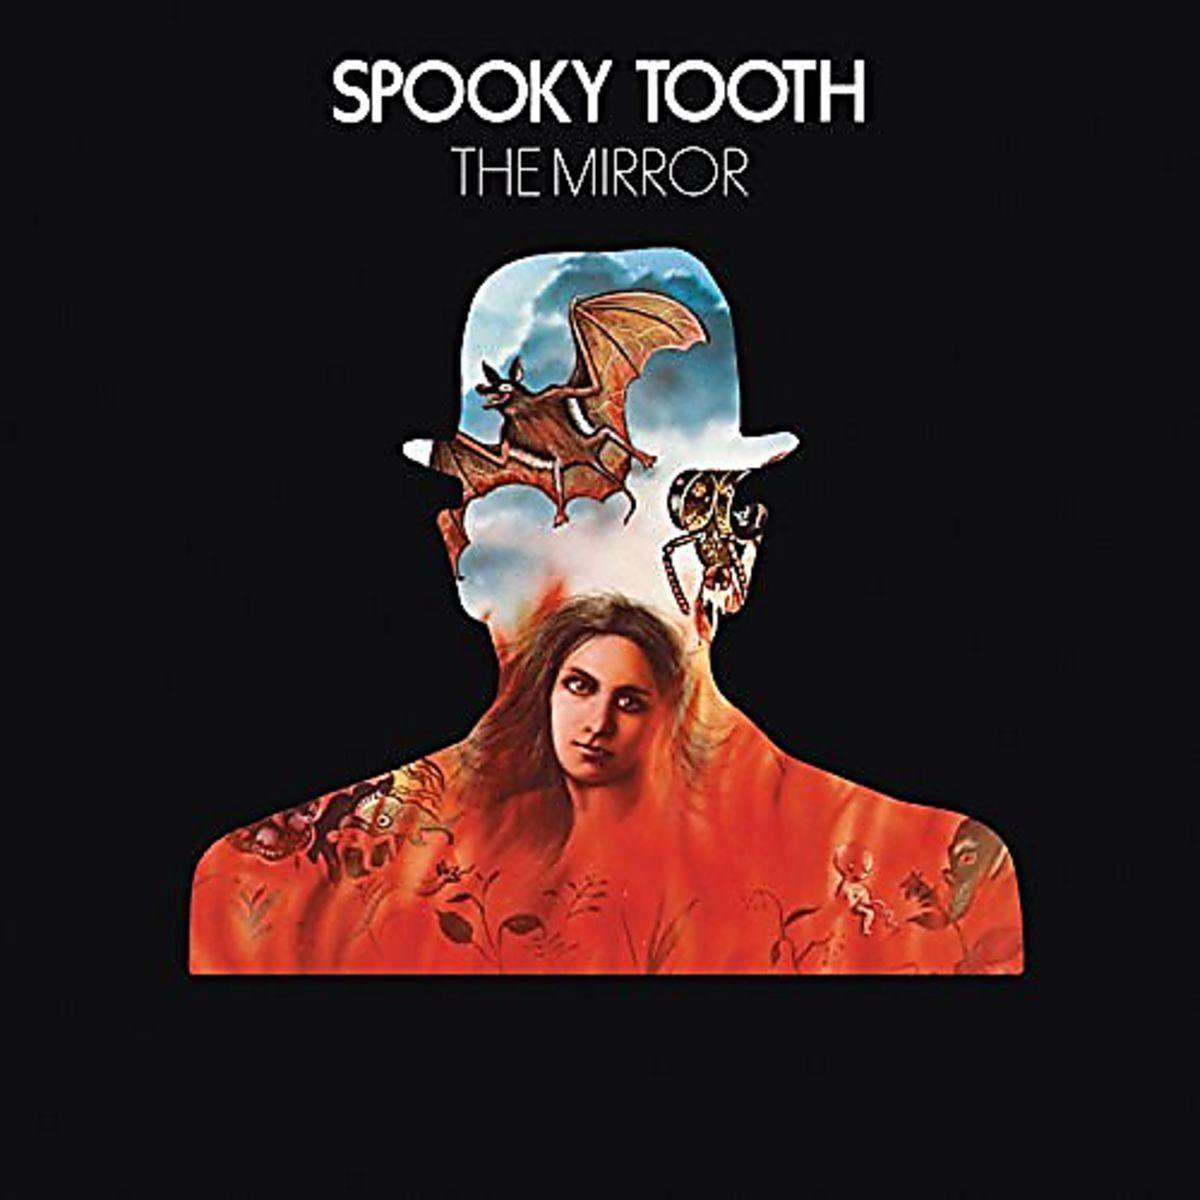 Island Records The mirror | spooky tooth